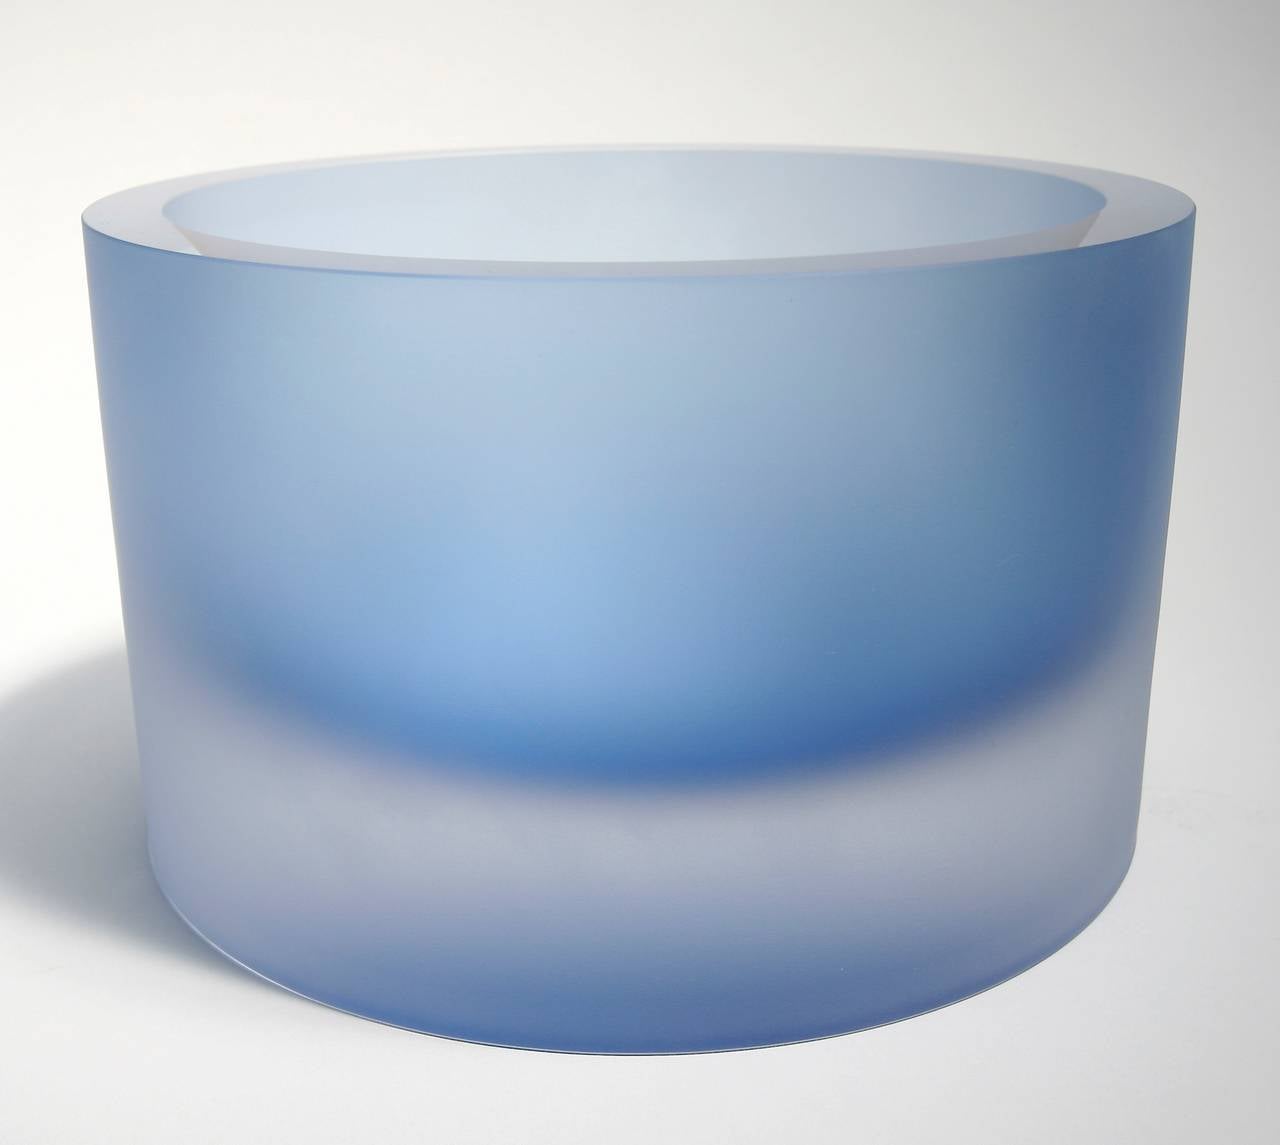 Anna Torfs large valenta glass bowl in water blue with sanded finish. Available in other colors.